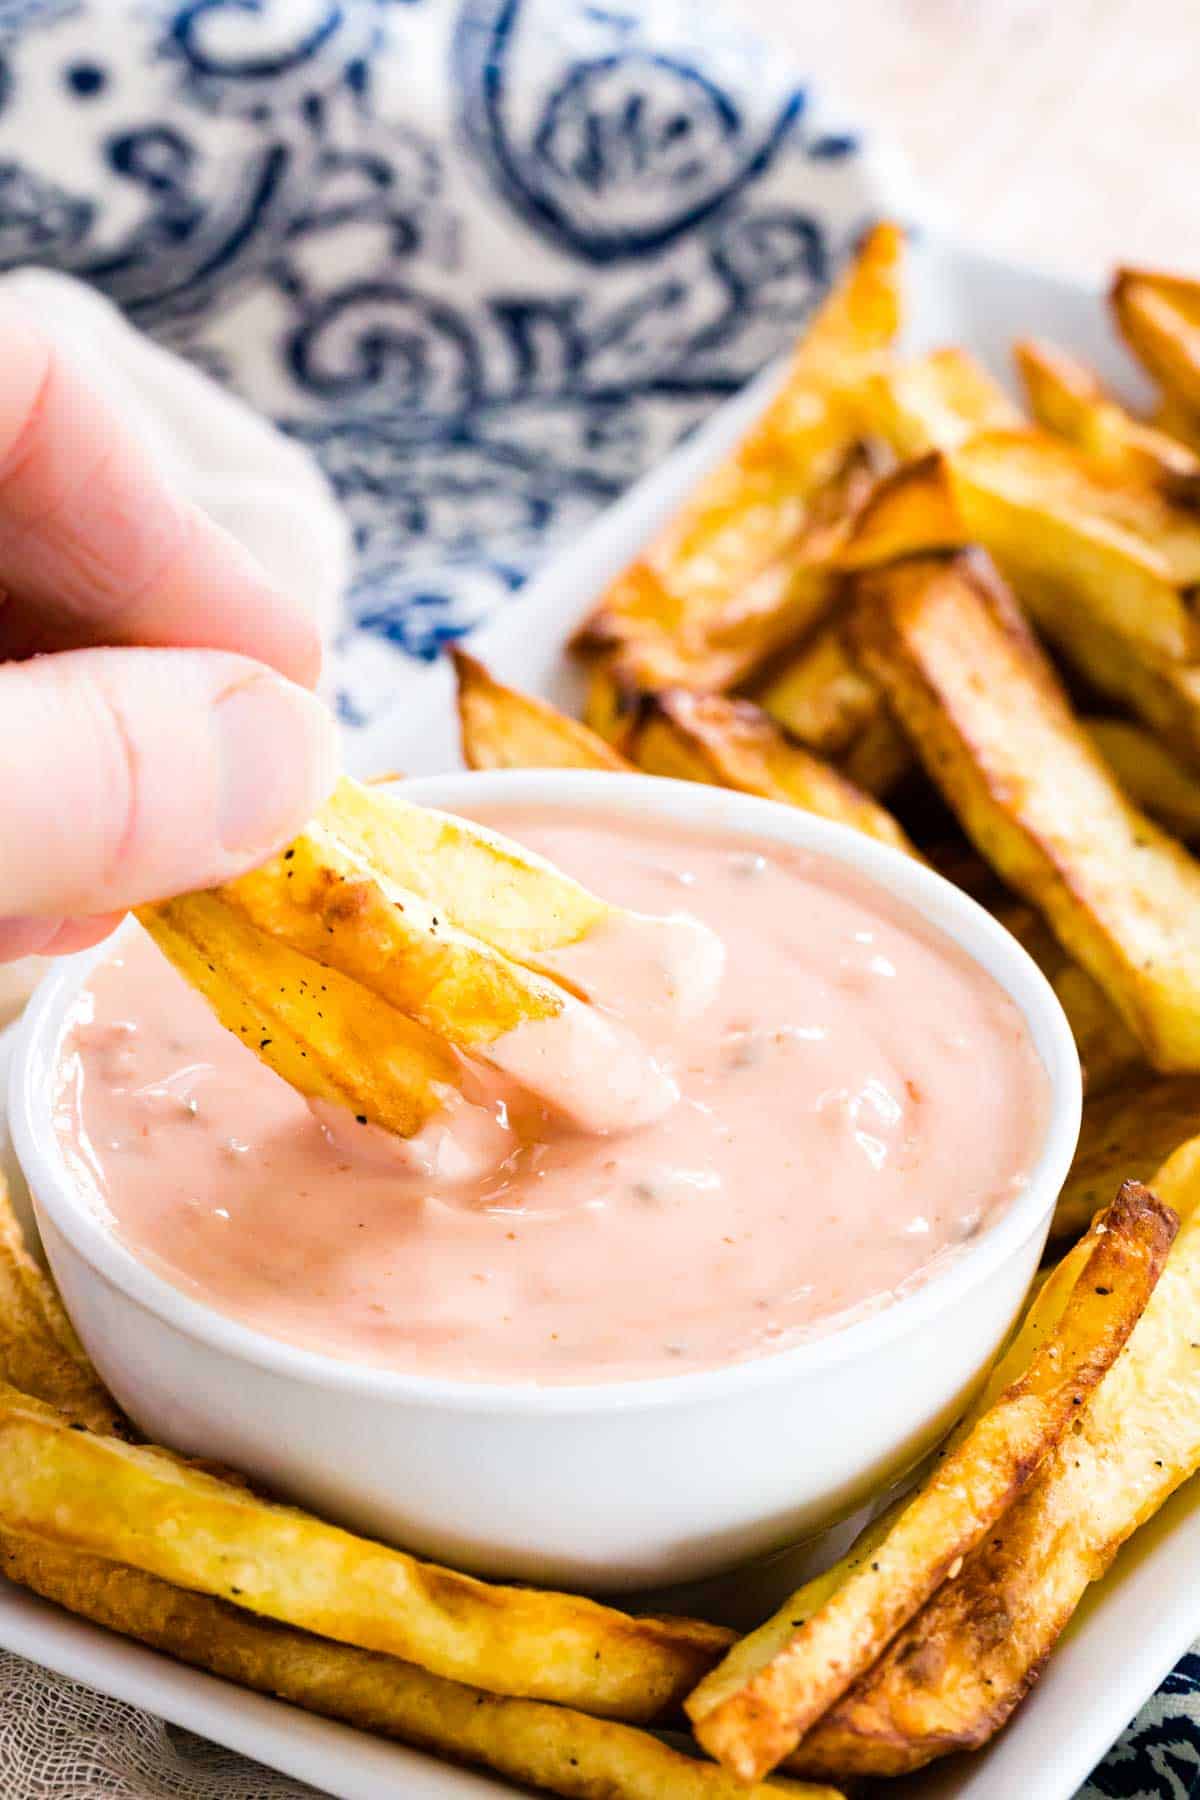 Fingers dipping French fries into a bowl of homemade Big Mac Sauce.